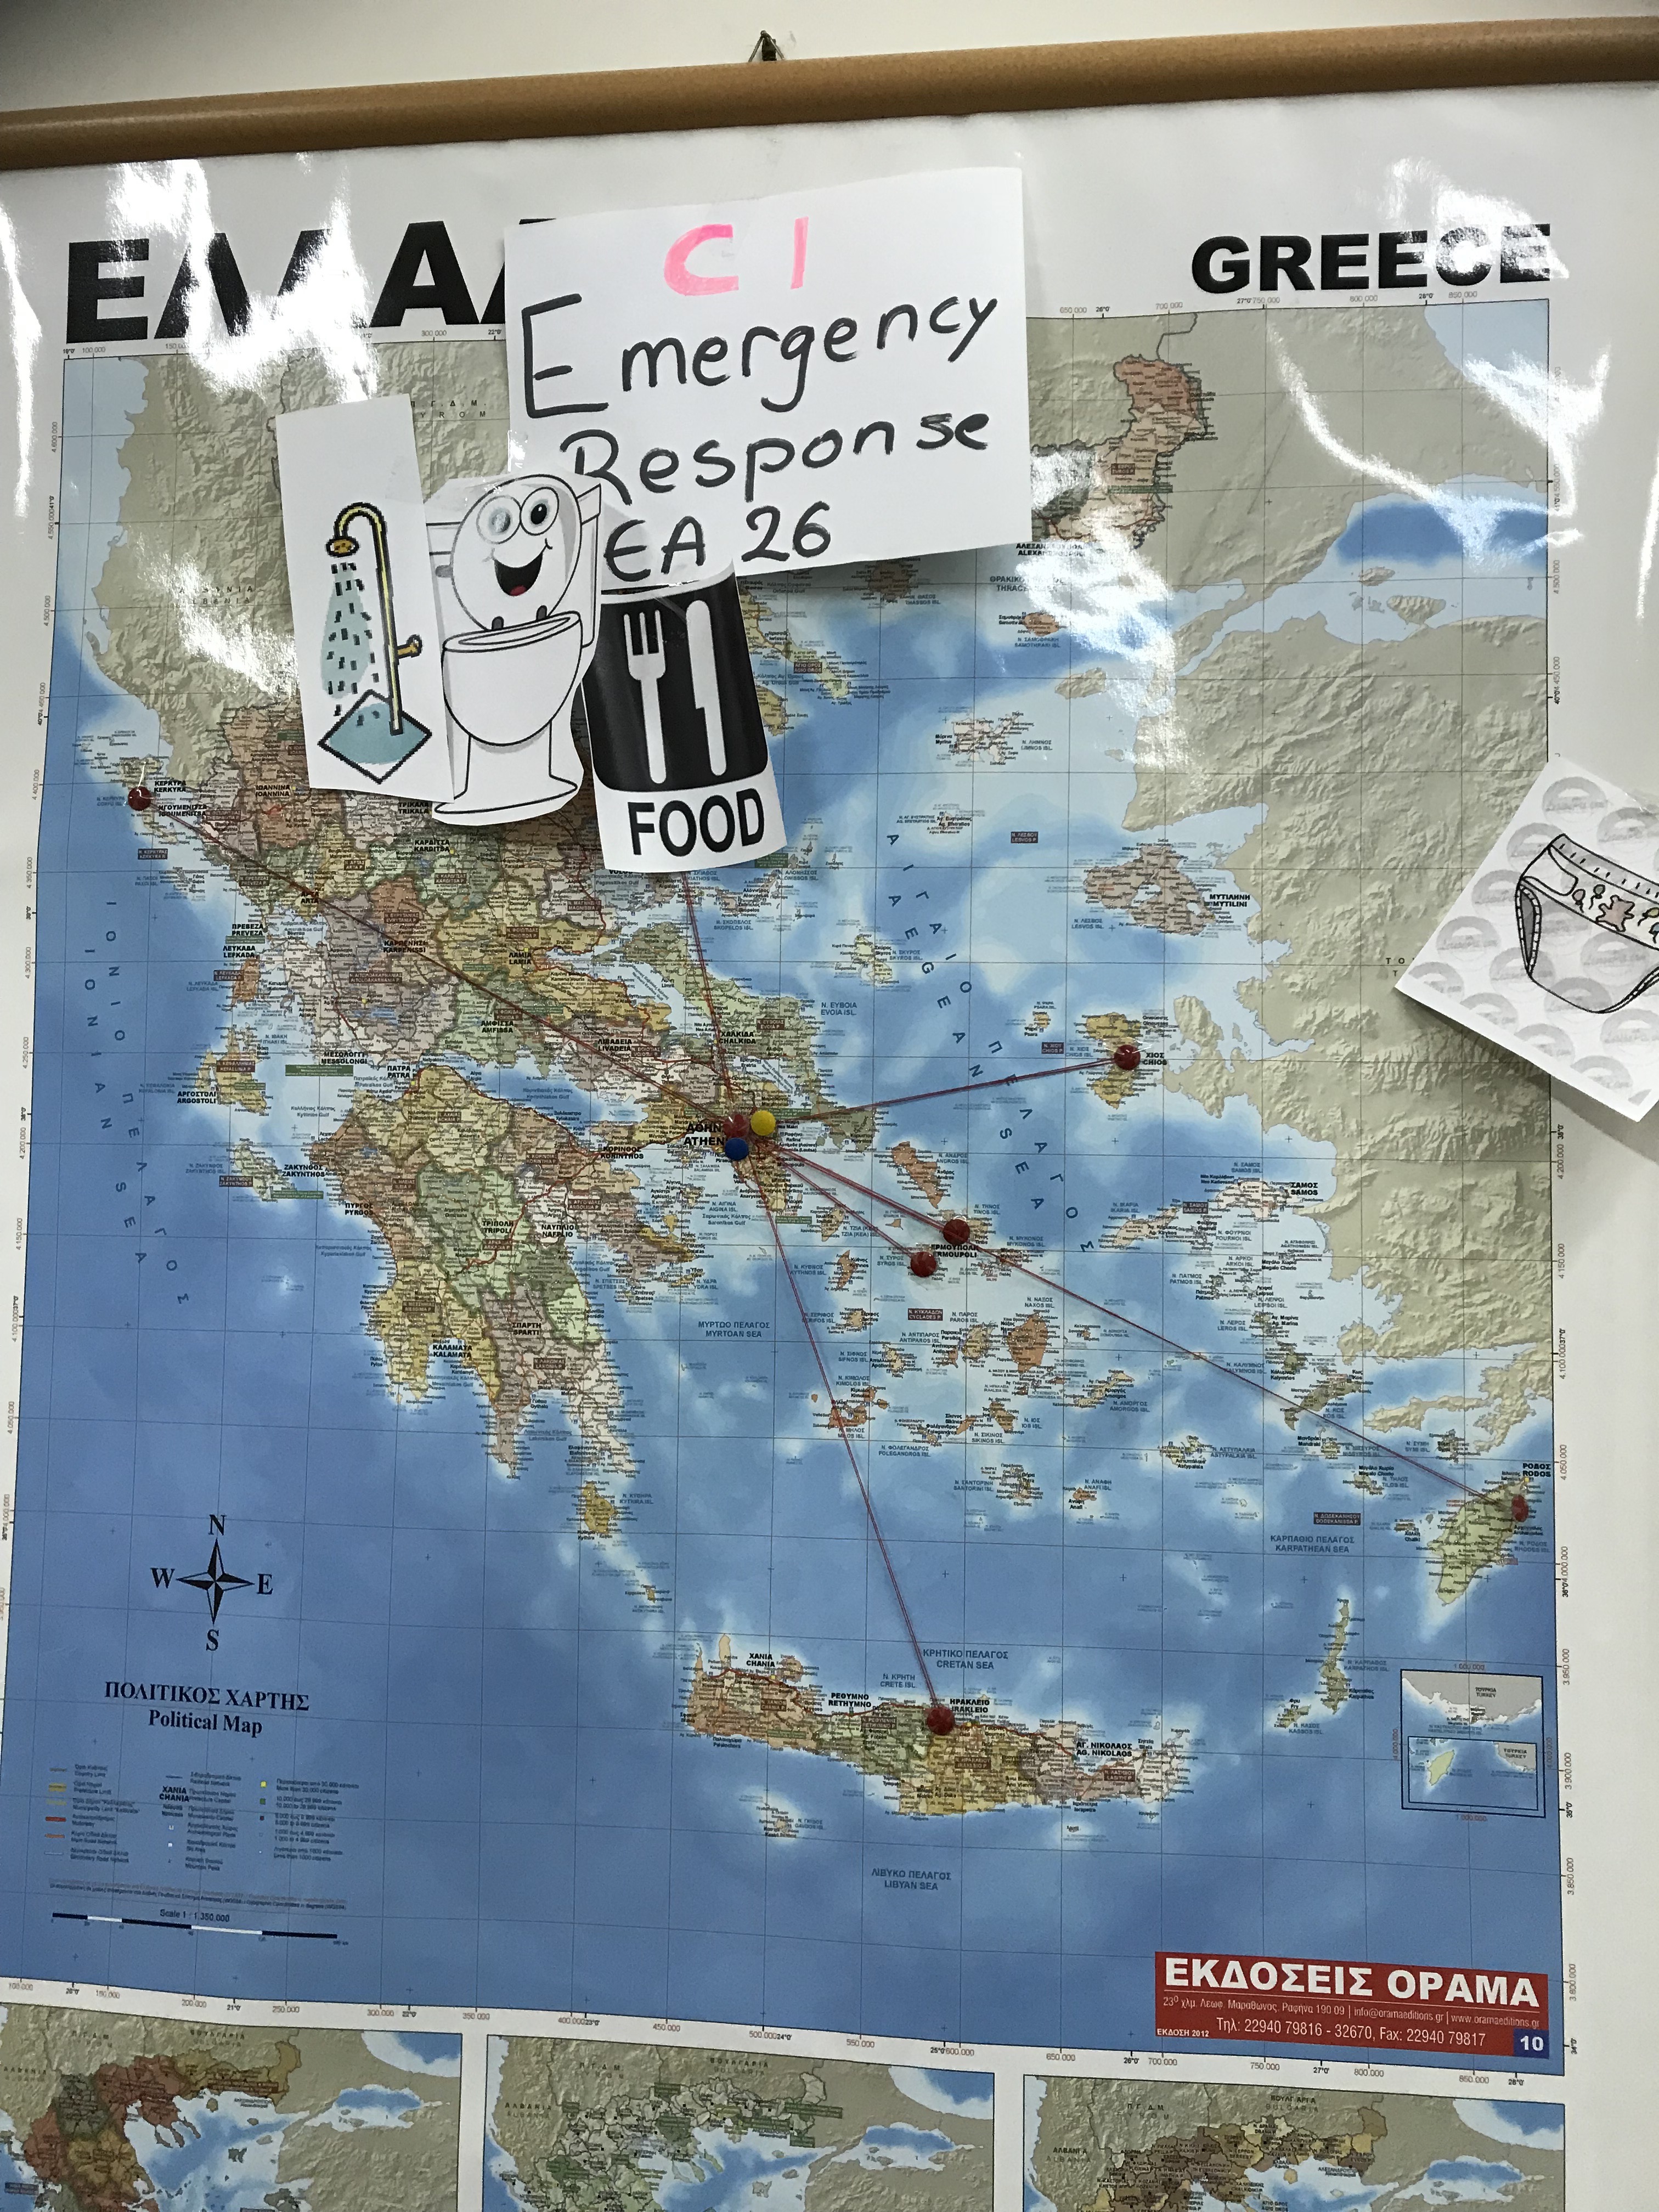 A map of Greece with pins showing the refugee camps.